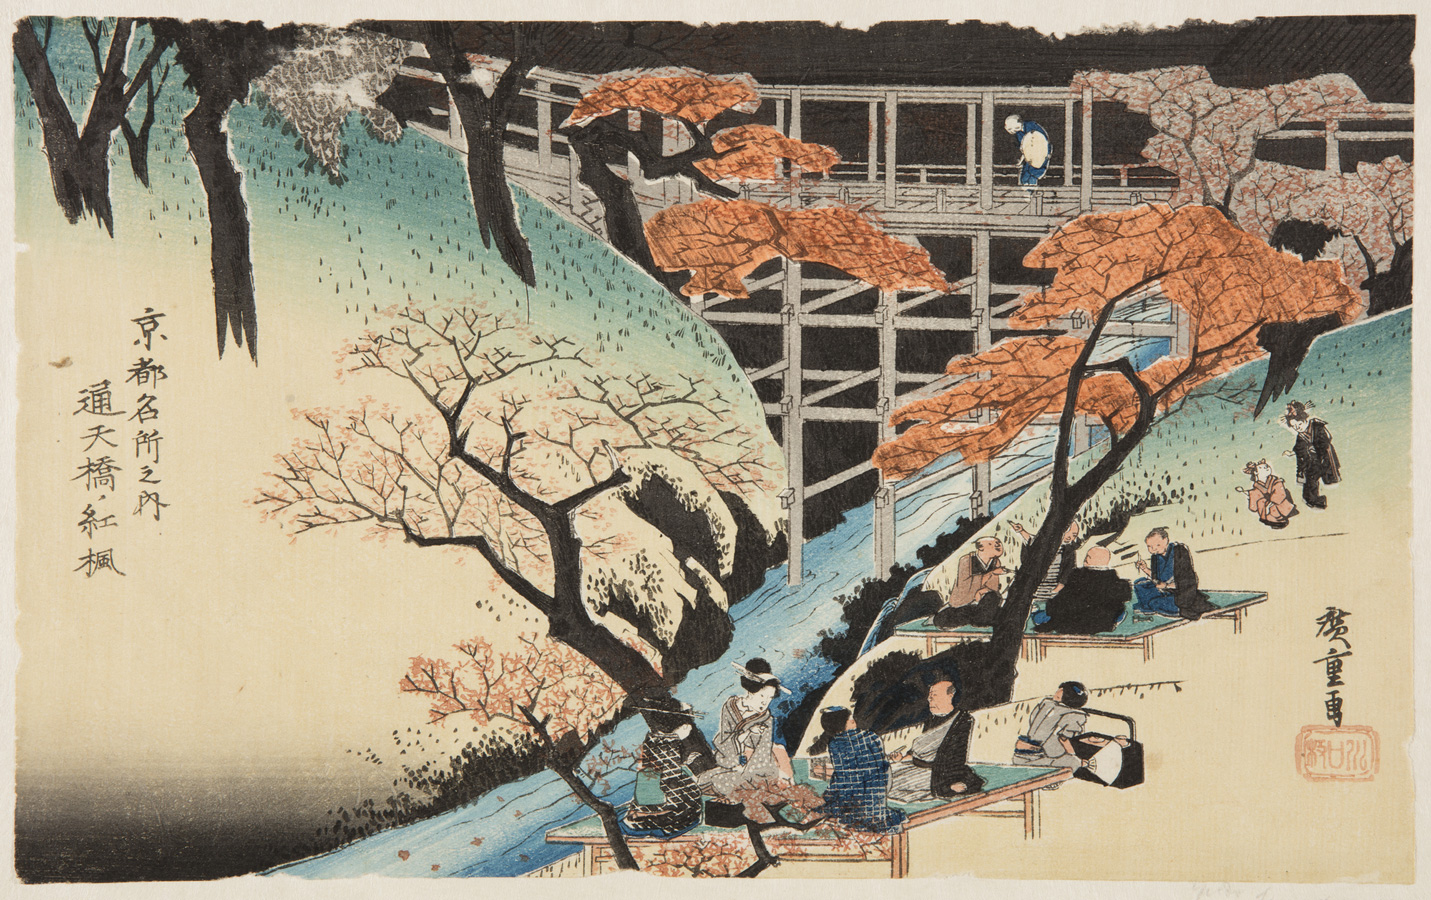 Japanese print of a landscape, people dressed in traditional clothes sit on platforms under maple trees by a river bank, behind is a wooden bridge and a figure looks down at the view.